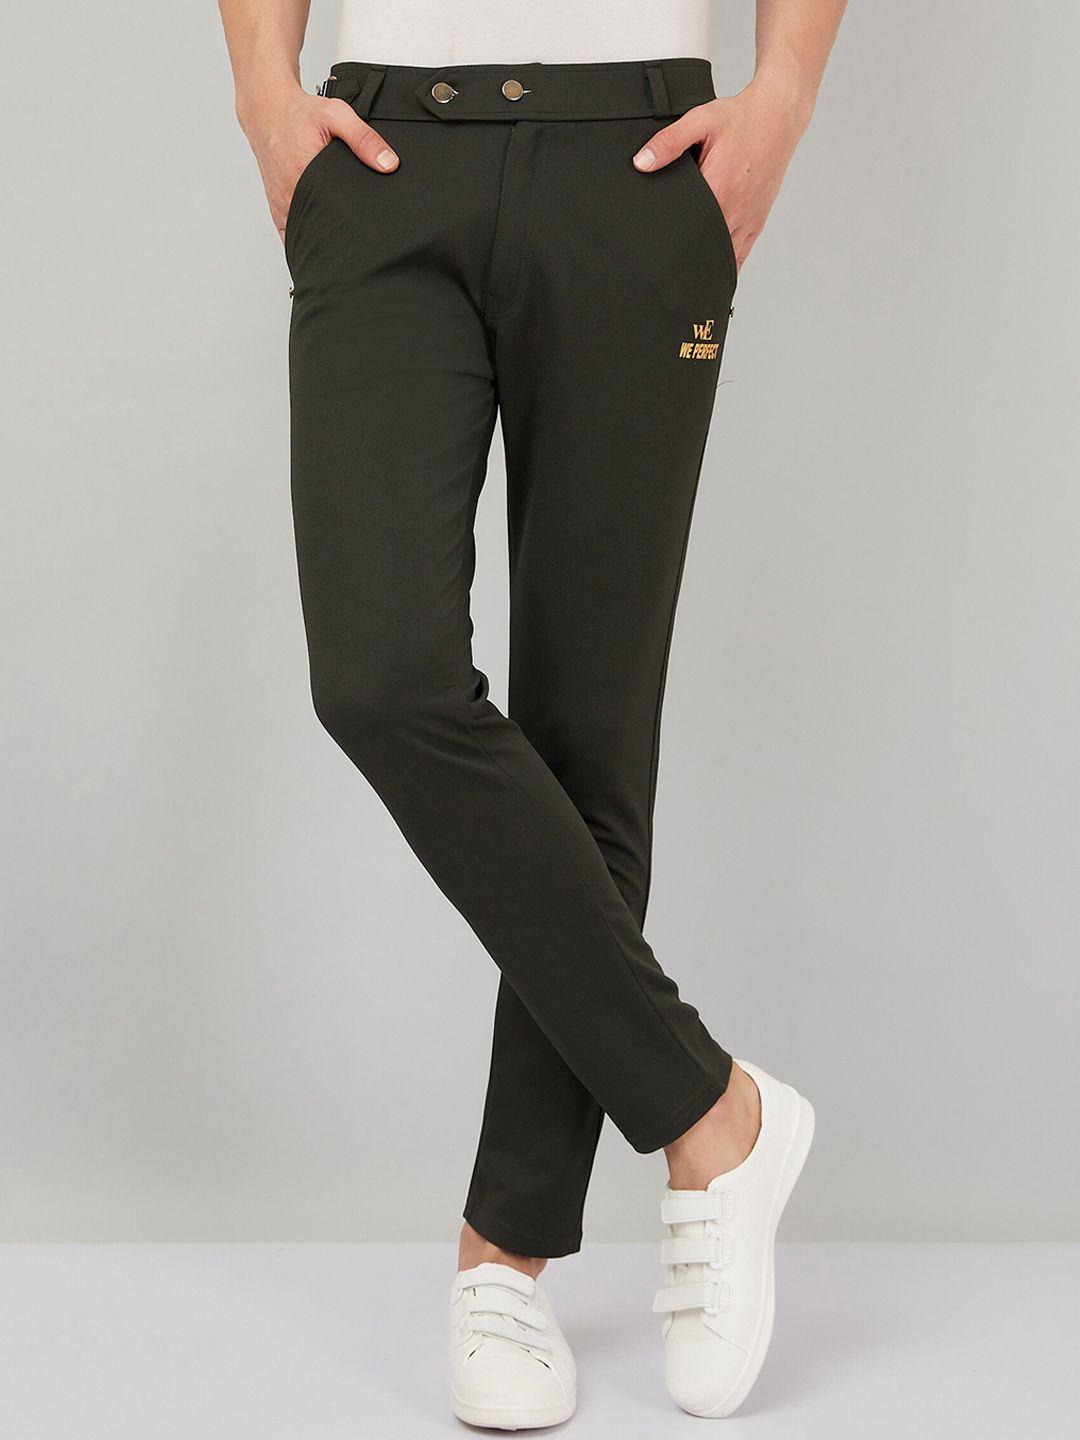 we perfect men mid-rise relaxed straight fit plain chinos trousers